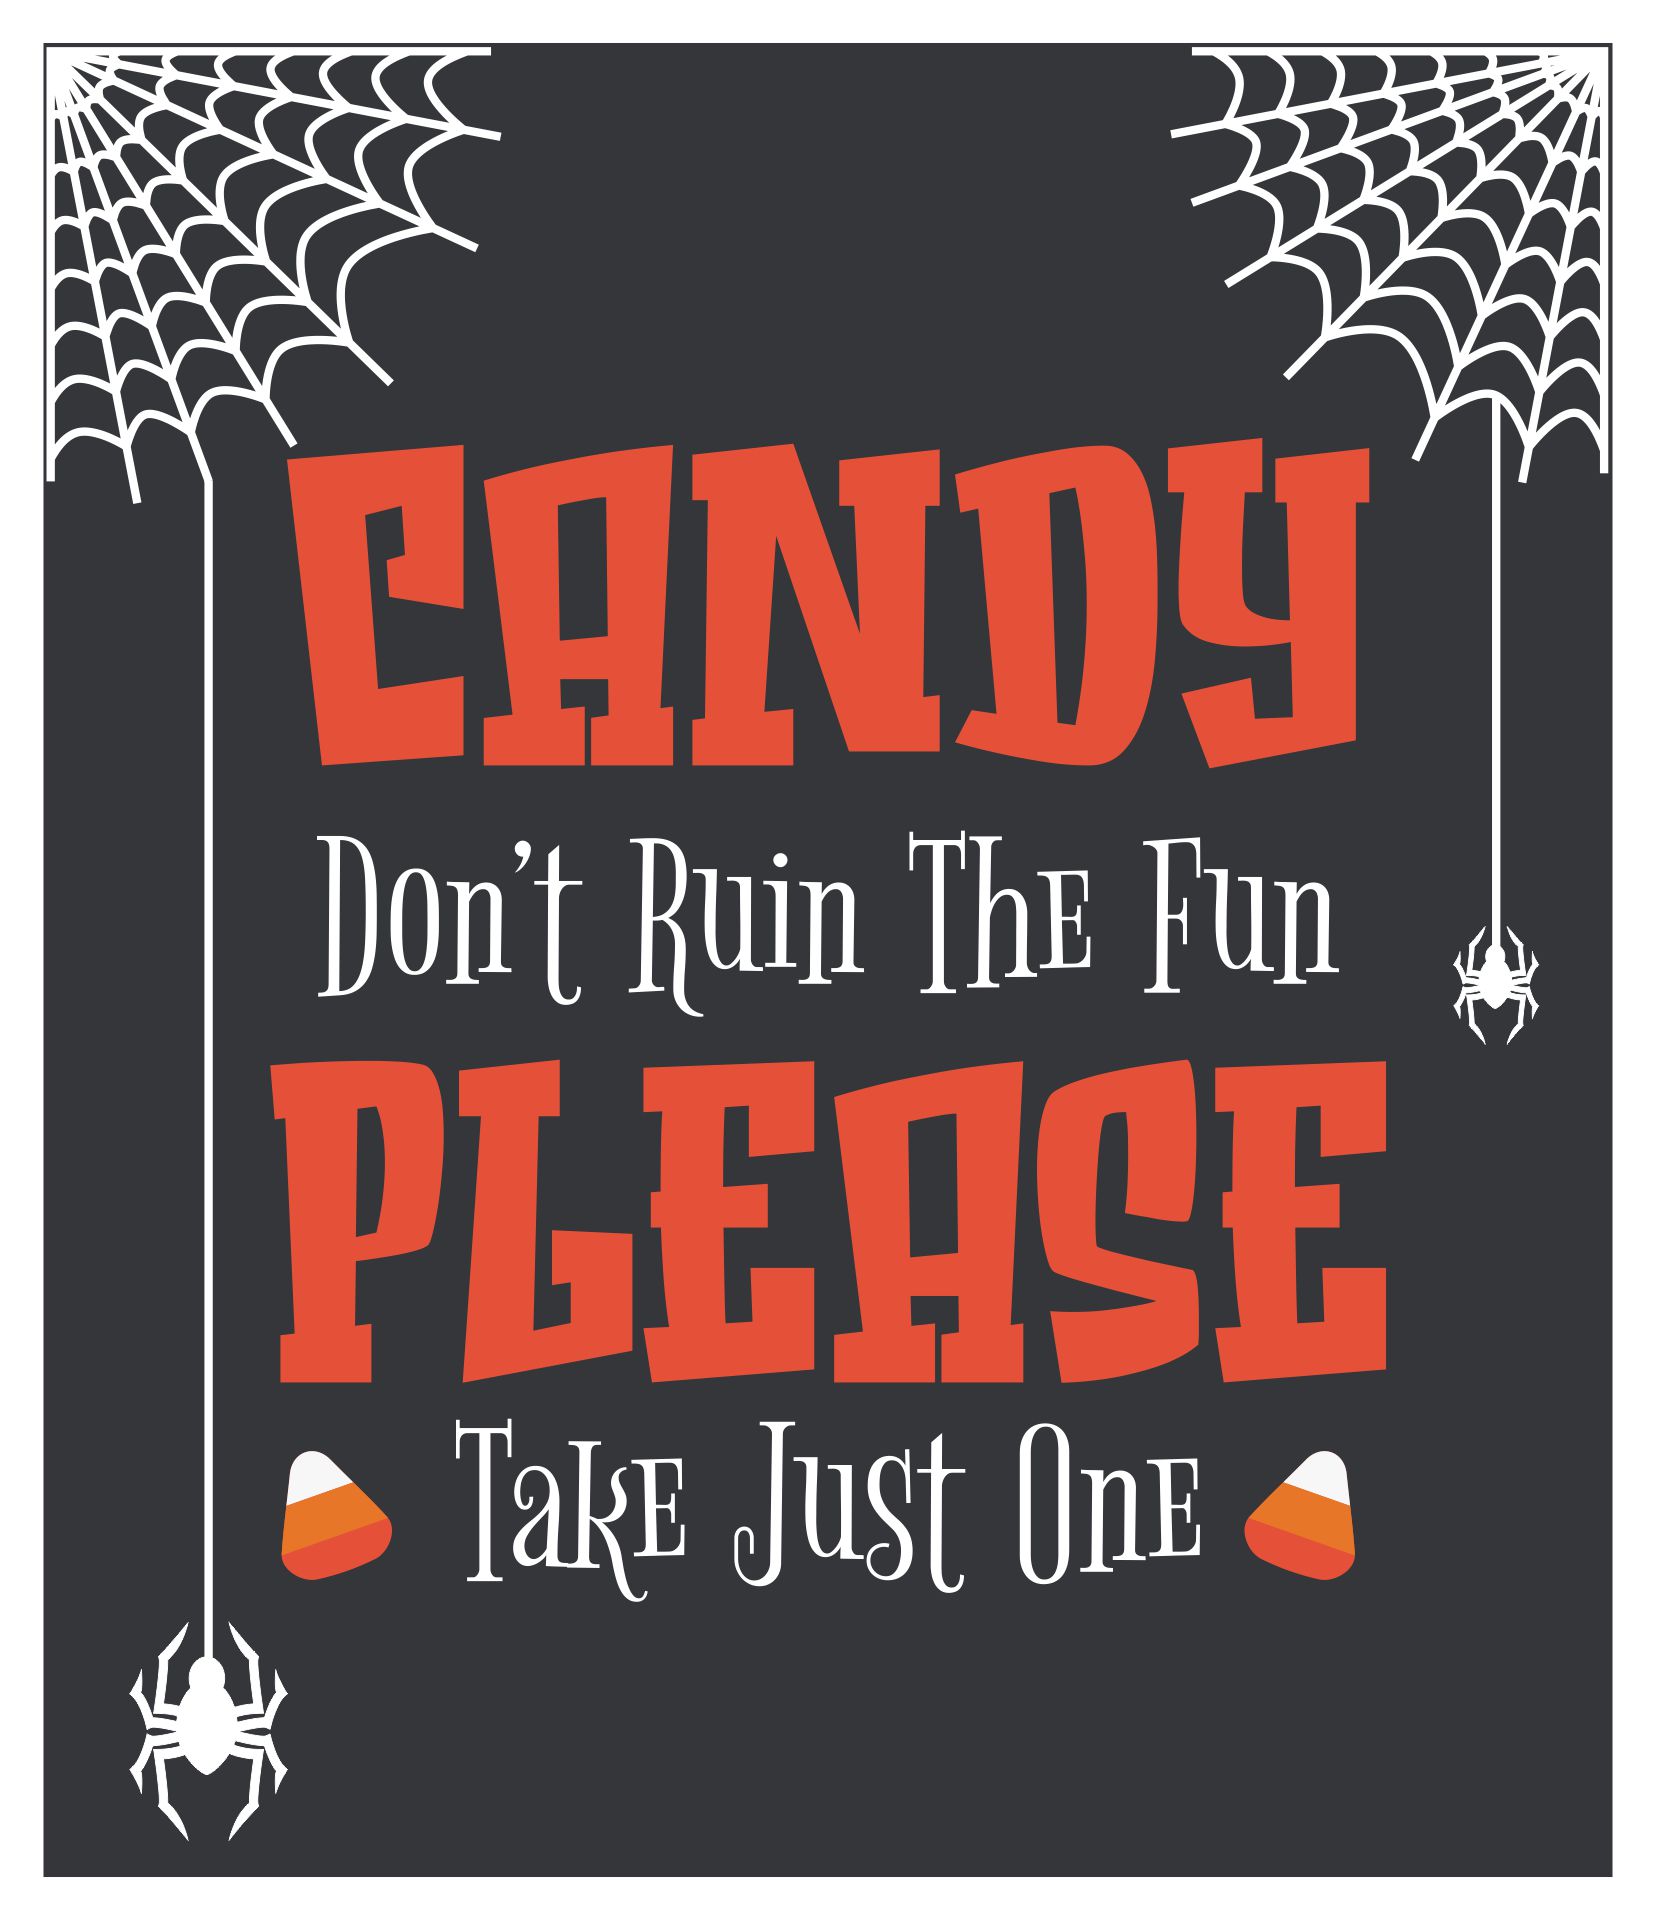 Printable Halloween Trick-or-Treat Signs For Candy